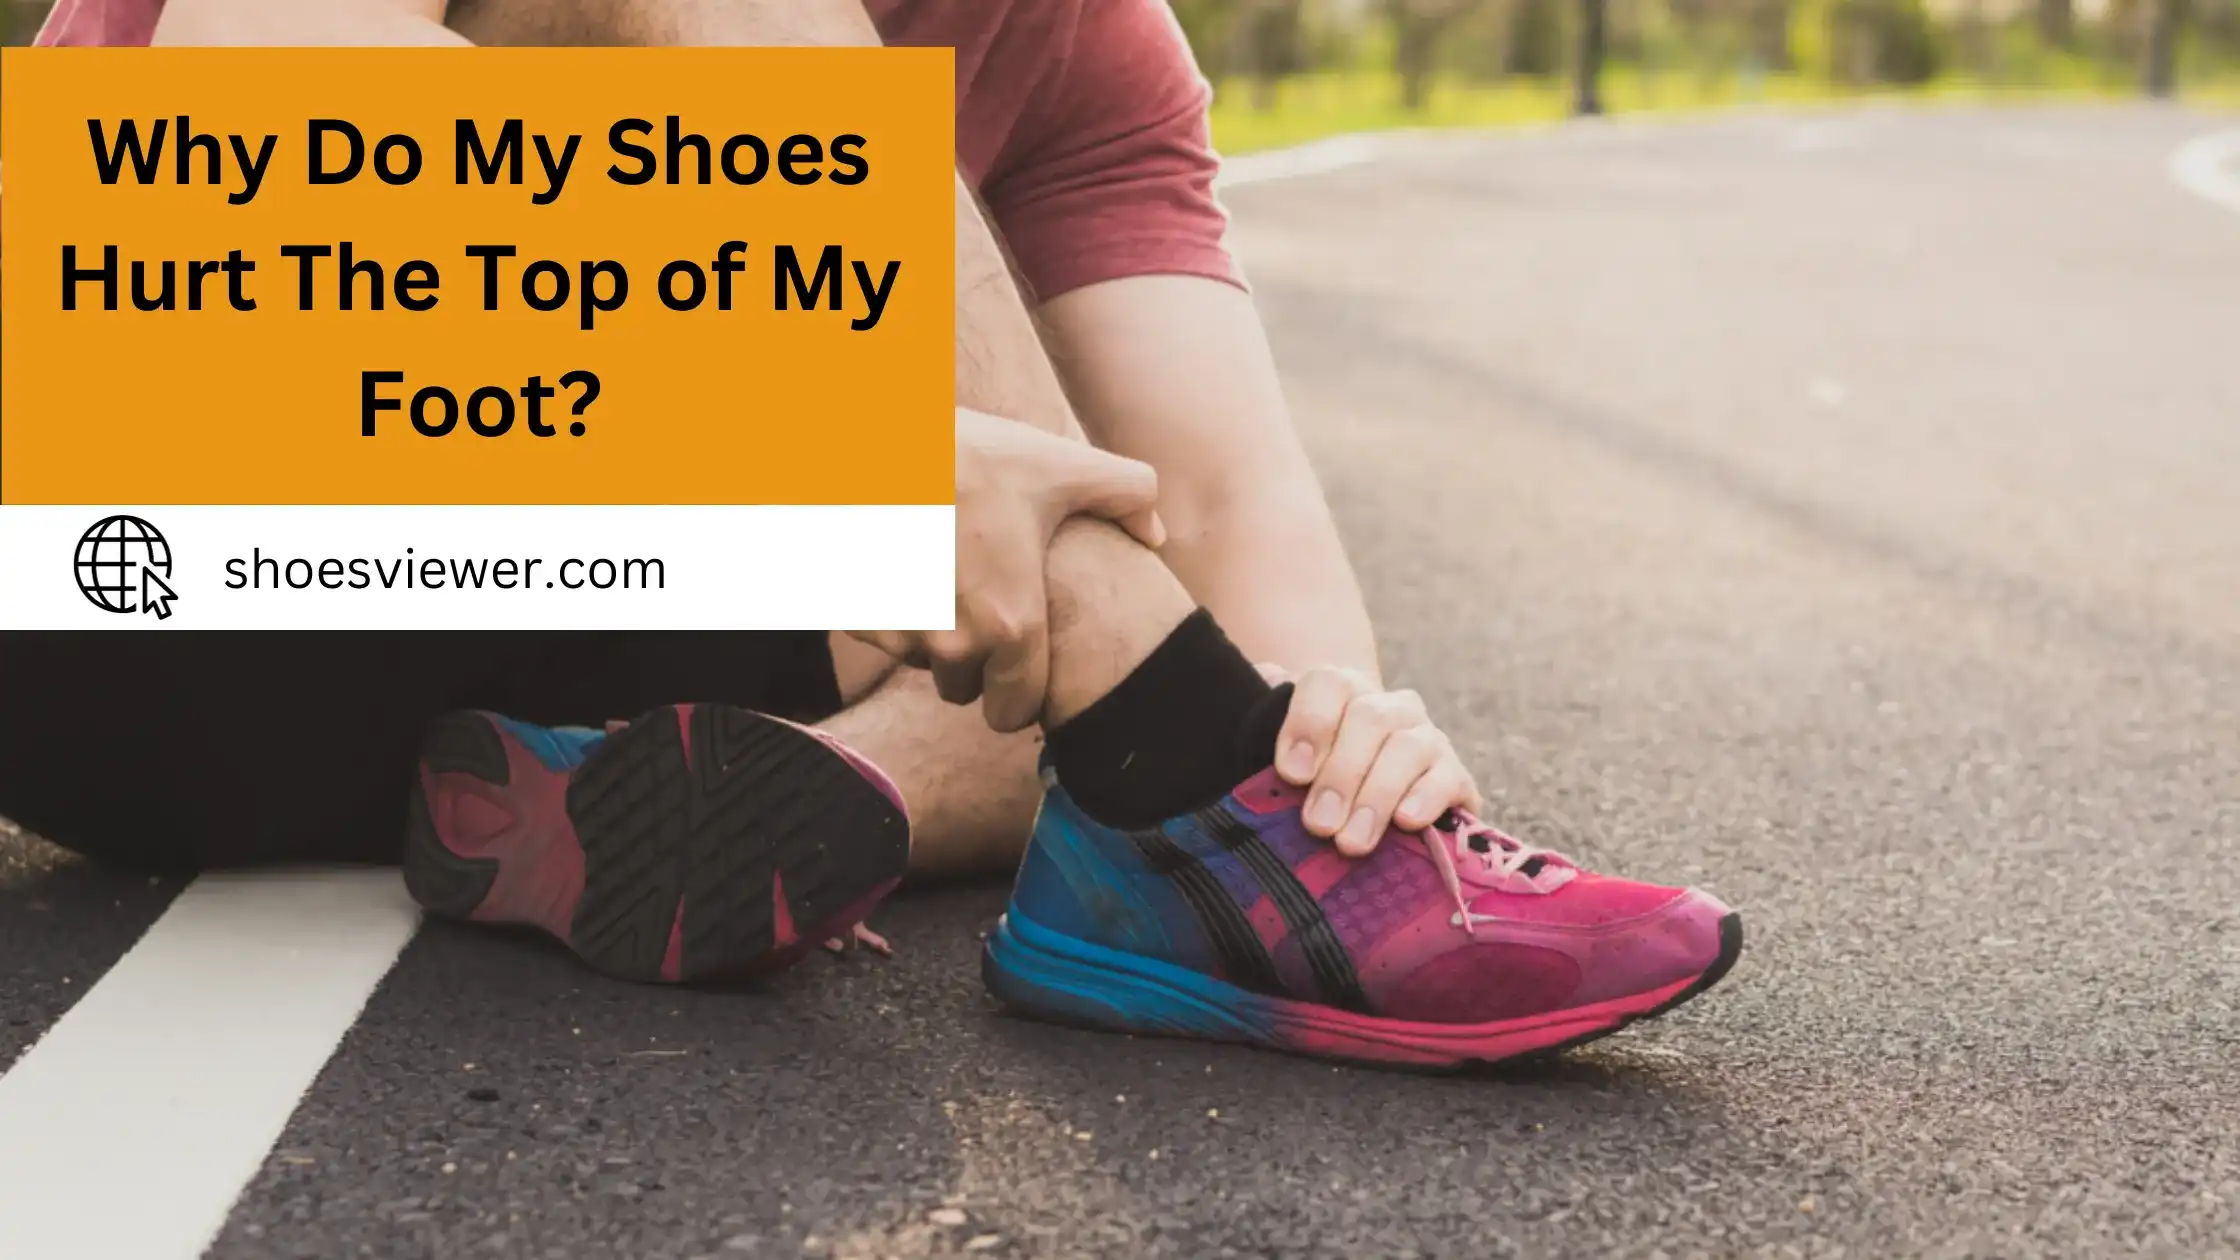 Why Do My Shoes Hurt The Top of my Foot? Expert Analysis